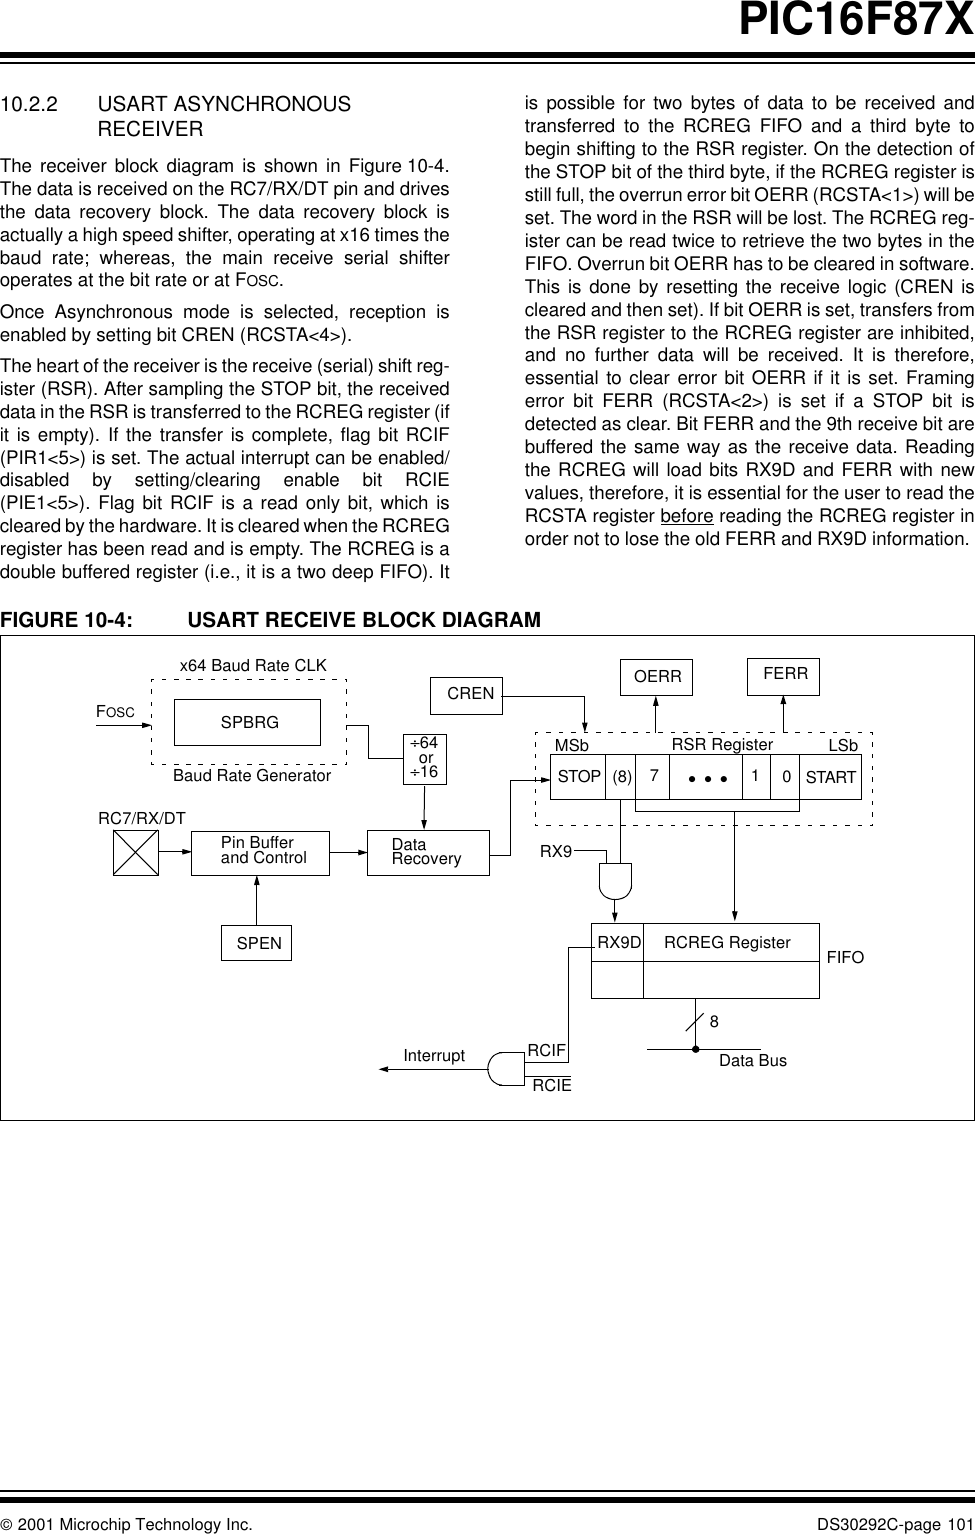  2001 Microchip Technology Inc. DS30292C-page 101PIC16F87X10.2.2 USART ASYNCHRONOUS RECEIVERThe receiver block diagram is shown in Figure 10-4.The data is received on the RC7/RX/DT pin and drivesthe data recovery block. The data recovery block isactually a high speed shifter, operating at x16 times thebaud rate; whereas, the main receive serial shifteroperates at the bit rate or at FOSC. Once Asynchronous mode is selected, reception isenabled by setting bit CREN (RCSTA&lt;4&gt;).The heart of the receiver is the receive (serial) shift reg-ister (RSR). After sampling the STOP bit, the receiveddata in the RSR is transferred to the RCREG register (ifit is empty). If the transfer is complete, flag bit RCIF(PIR1&lt;5&gt;) is set. The actual interrupt can be enabled/disabled by setting/clearing enable bit RCIE(PIE1&lt;5&gt;). Flag bit RCIF is a read only bit, which iscleared by the hardware. It is cleared when the RCREGregister has been read and is empty. The RCREG is adouble buffered register (i.e., it is a two deep FIFO). Itis possible for two bytes of data to be received andtransferred to the RCREG FIFO and a third byte tobegin shifting to the RSR register. On the detection ofthe STOP bit of the third byte, if the RCREG register isstill full, the overrun error bit OERR (RCSTA&lt;1&gt;) will beset. The word in the RSR will be lost. The RCREG reg-ister can be read twice to retrieve the two bytes in theFIFO. Overrun bit OERR has to be cleared in software.This is done by resetting the receive logic (CREN iscleared and then set). If bit OERR is set, transfers fromthe RSR register to the RCREG register are inhibited,and no further data will be received. It is therefore,essential to clear error bit OERR if it is set. Framingerror bit FERR (RCSTA&lt;2&gt;) is set if a STOP bit isdetected as clear. Bit FERR and the 9th receive bit arebuffered the same way as the receive data. Readingthe RCREG will load bits RX9D and FERR with newvalues, therefore, it is essential for the user to read theRCSTA register before reading the RCREG register inorder not to lose the old FERR and RX9D information. FIGURE 10-4: USART RECEIVE BLOCK DIAGRAMx64 Baud Rate CLKSPBRGBaud Rate GeneratorRC7/RX/DTPin Bufferand ControlSPENDataRecoveryCREN OERR FERRRSR RegisterMSb LSbRX9D RCREG Register FIFOInterrupt RCIFRCIEData Bus8÷64÷16or STOP START(8) 710RX9•  •  •FOSC